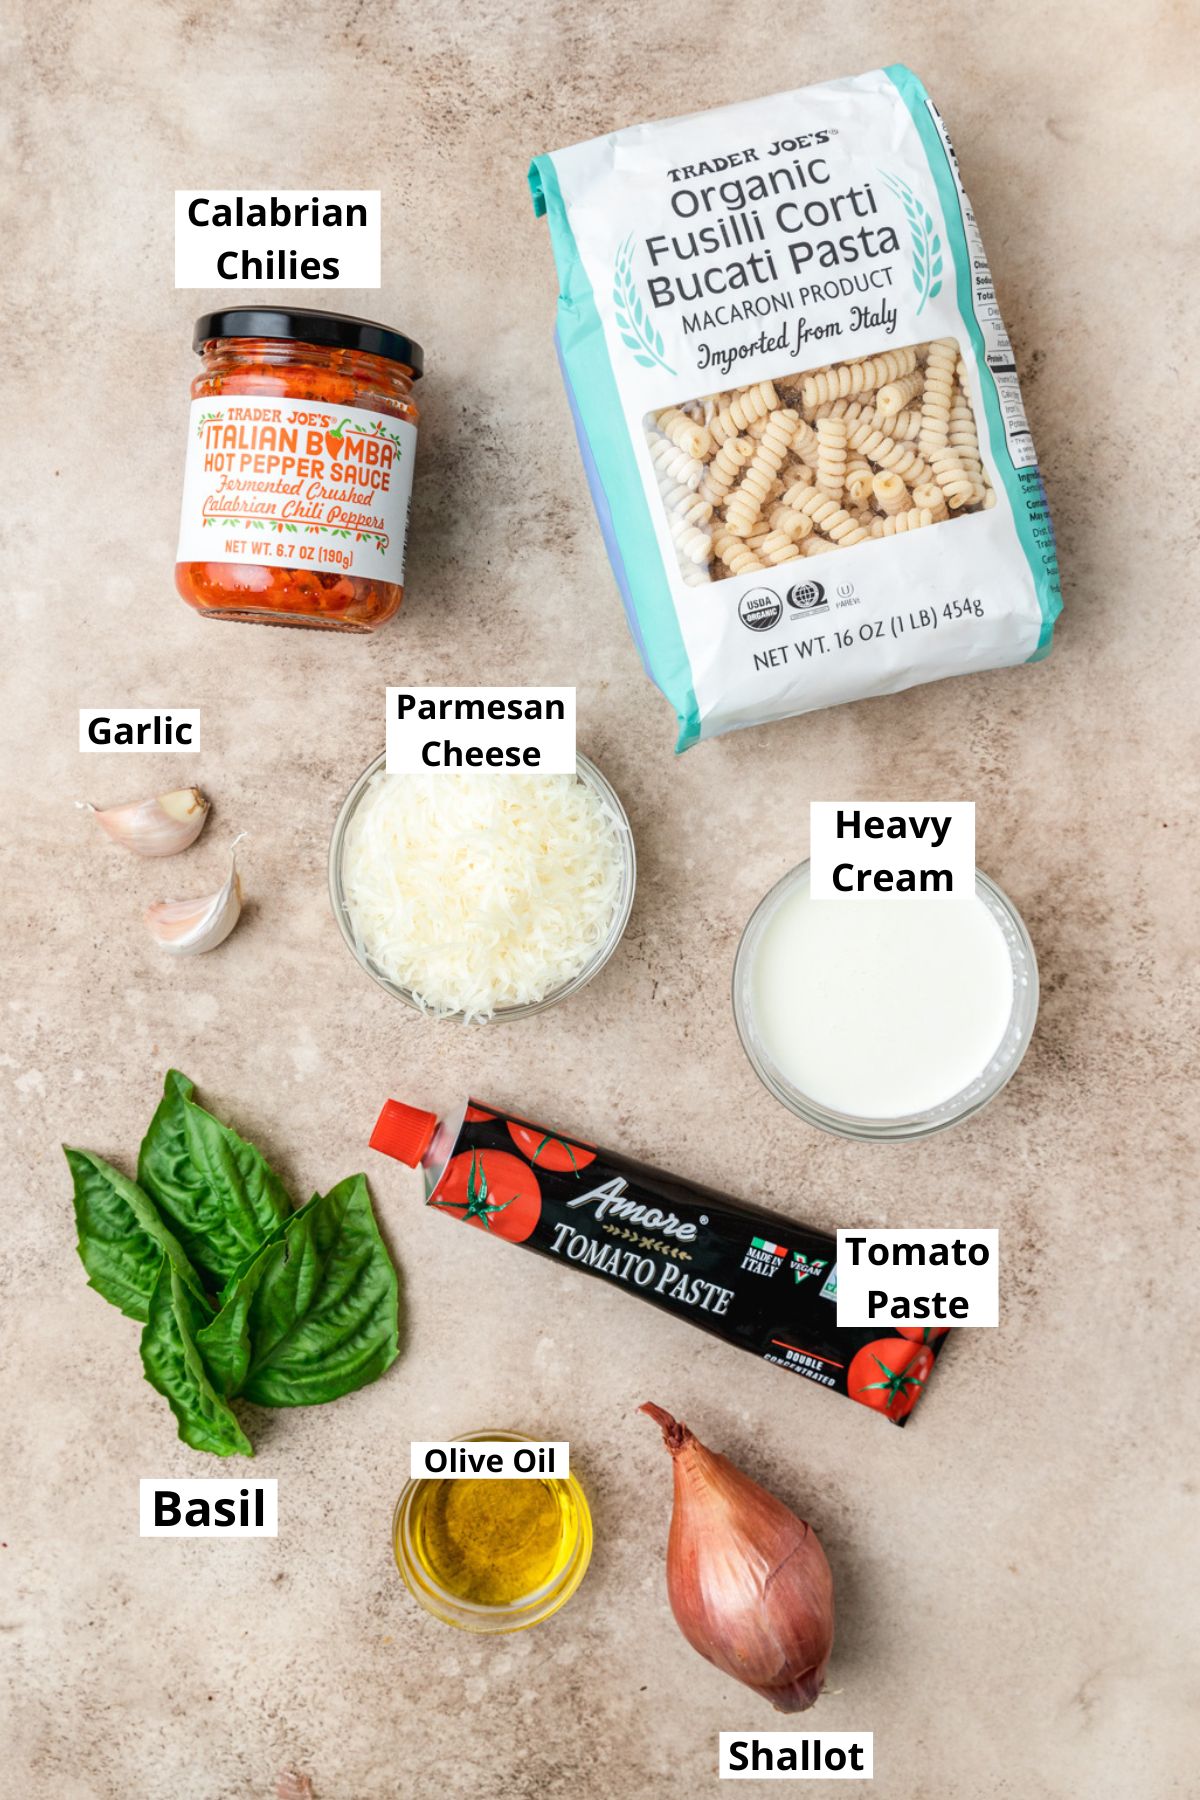 labeled ingredients for calabrian chili pasta sauce.